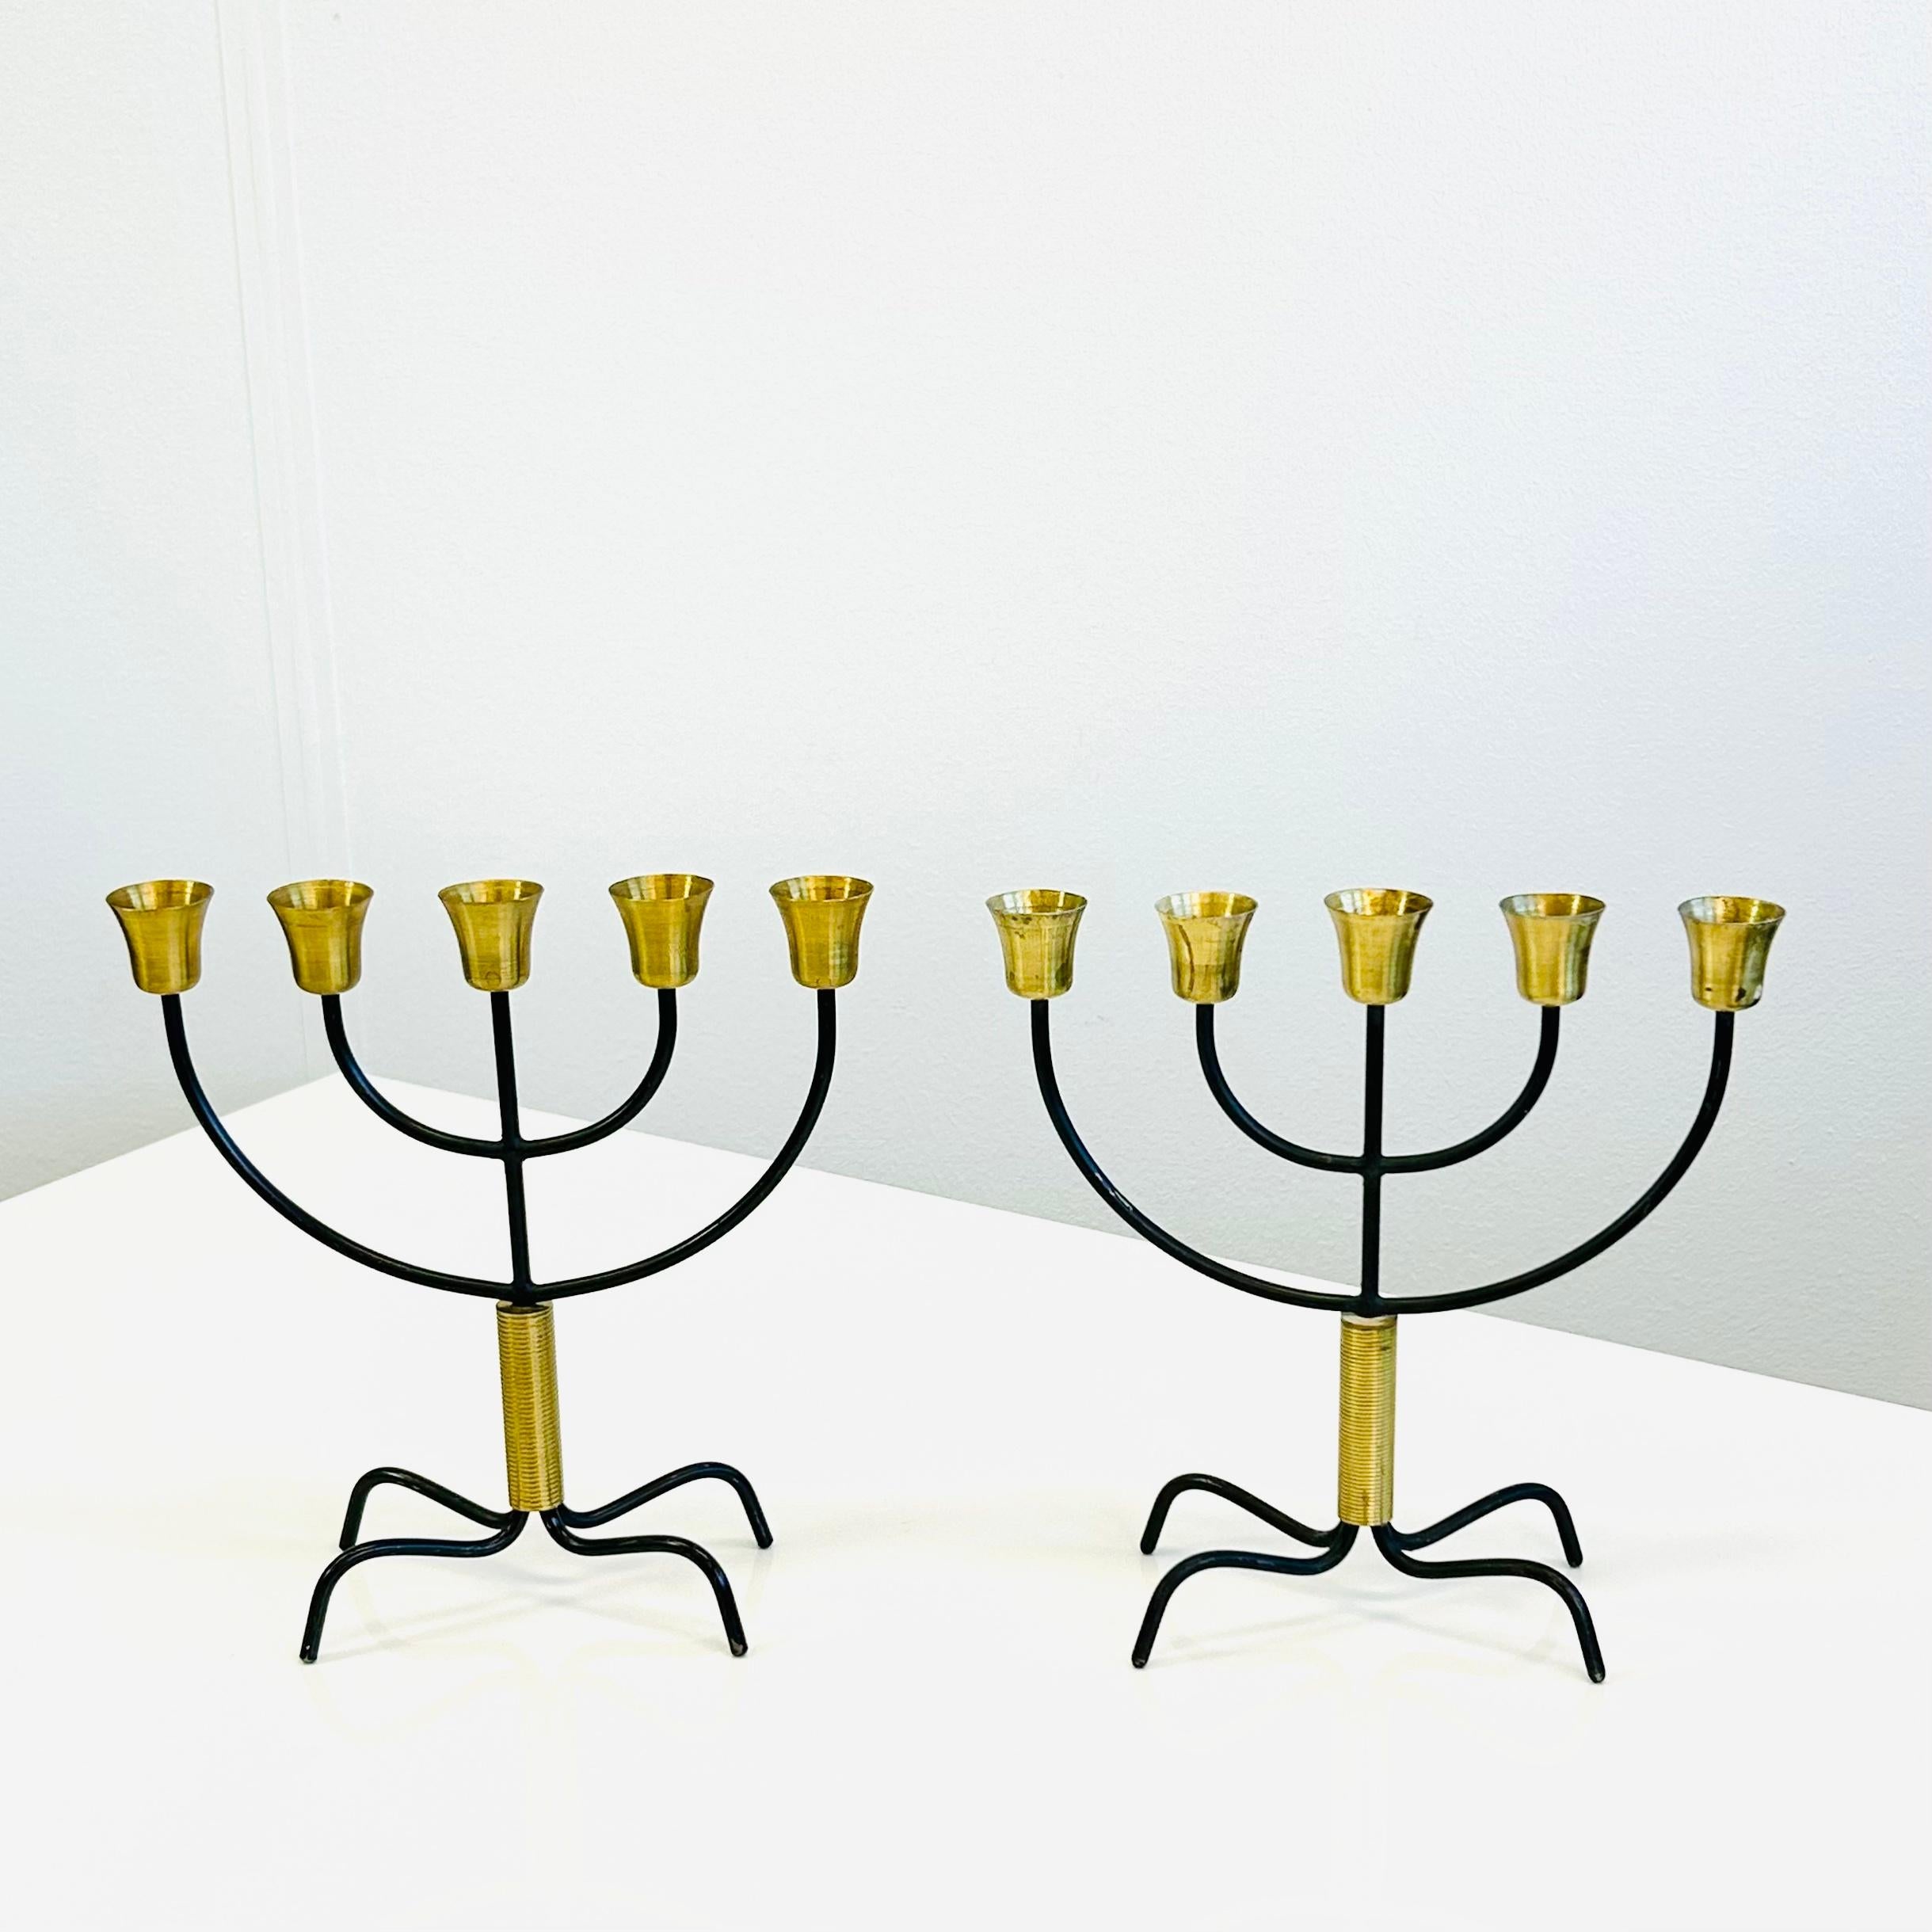 Mid-20th Century A rare pair of candelabras by Svend Aage Holm Sorensen, 1960s, Denmark For Sale